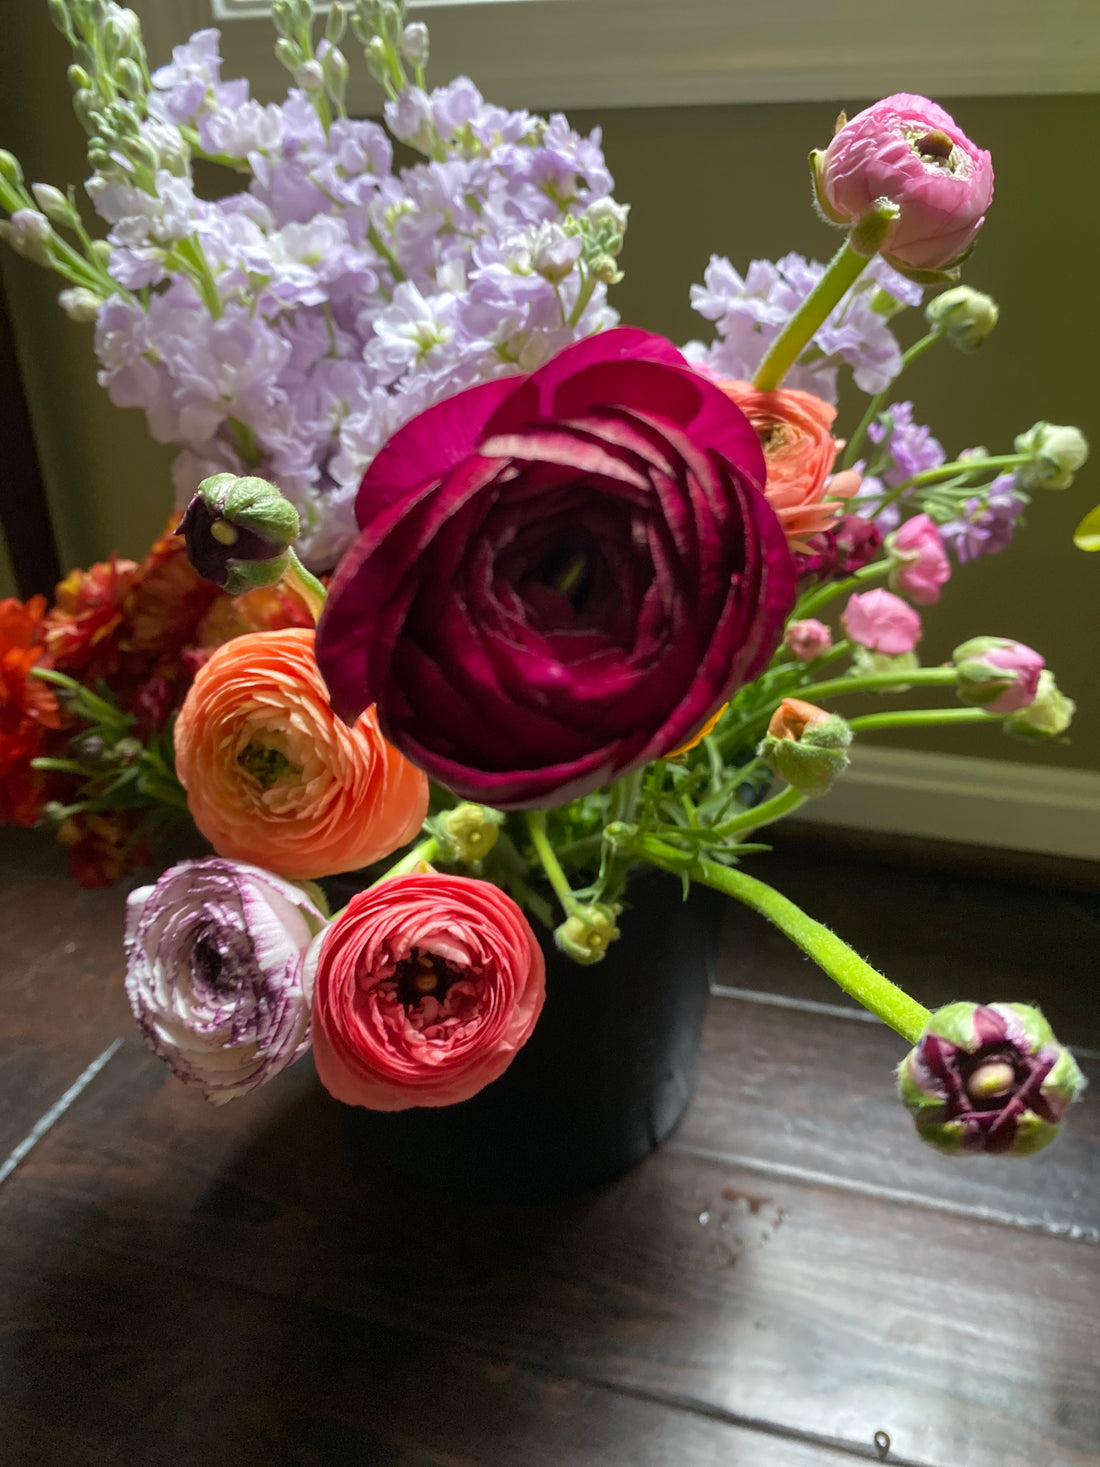 Locally grown ranunculus and stock